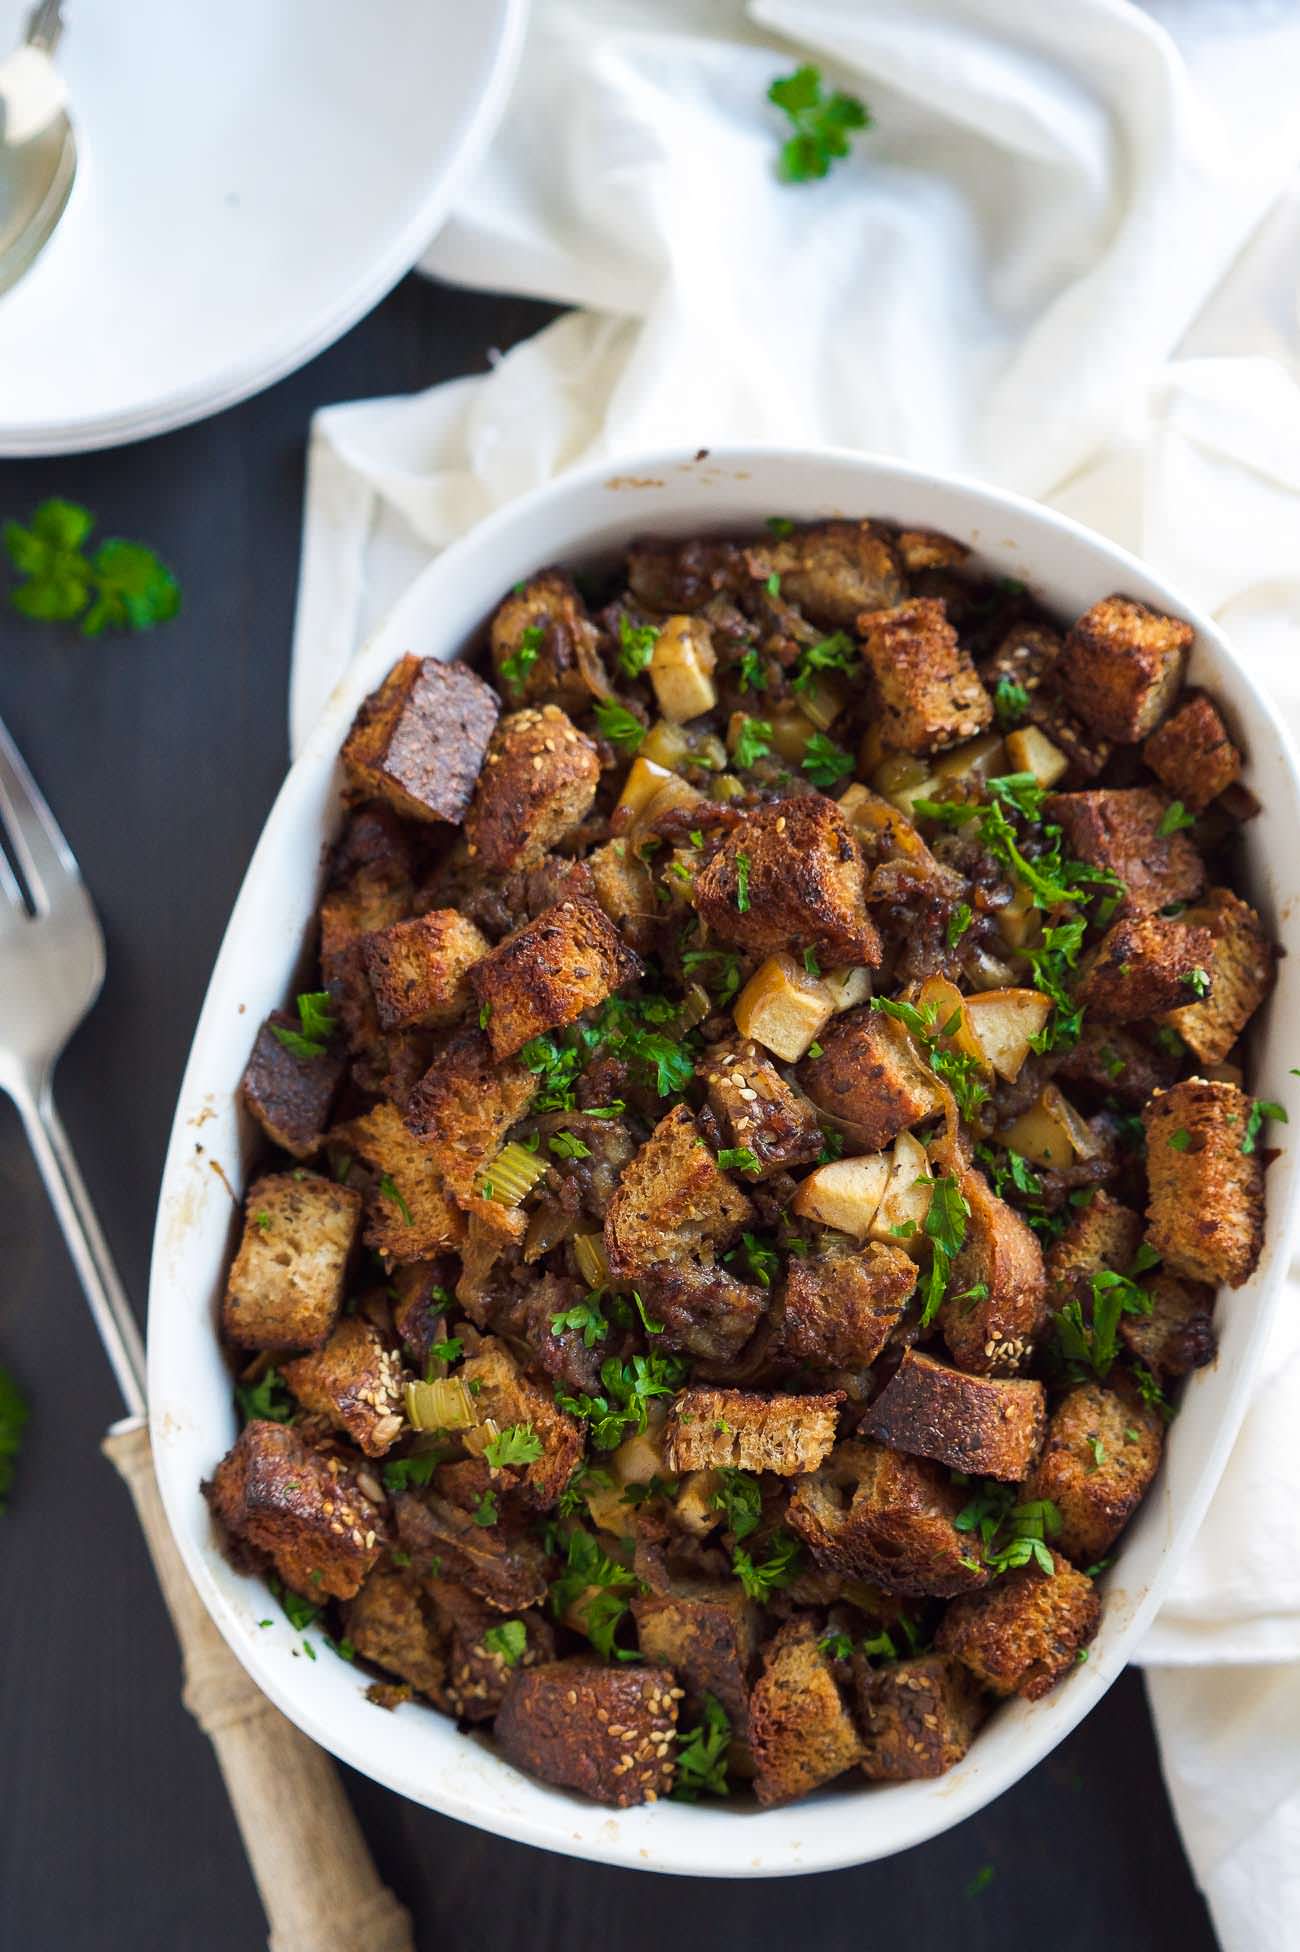 This Caramelized Onion, Apple and Sausage Whole Grain Stuffing is a sweet and savory, flavor-packed stuffing your Thanksgiving table needs. Everyone will love the savory sausage, sweet apples and buttery caramelized onions.